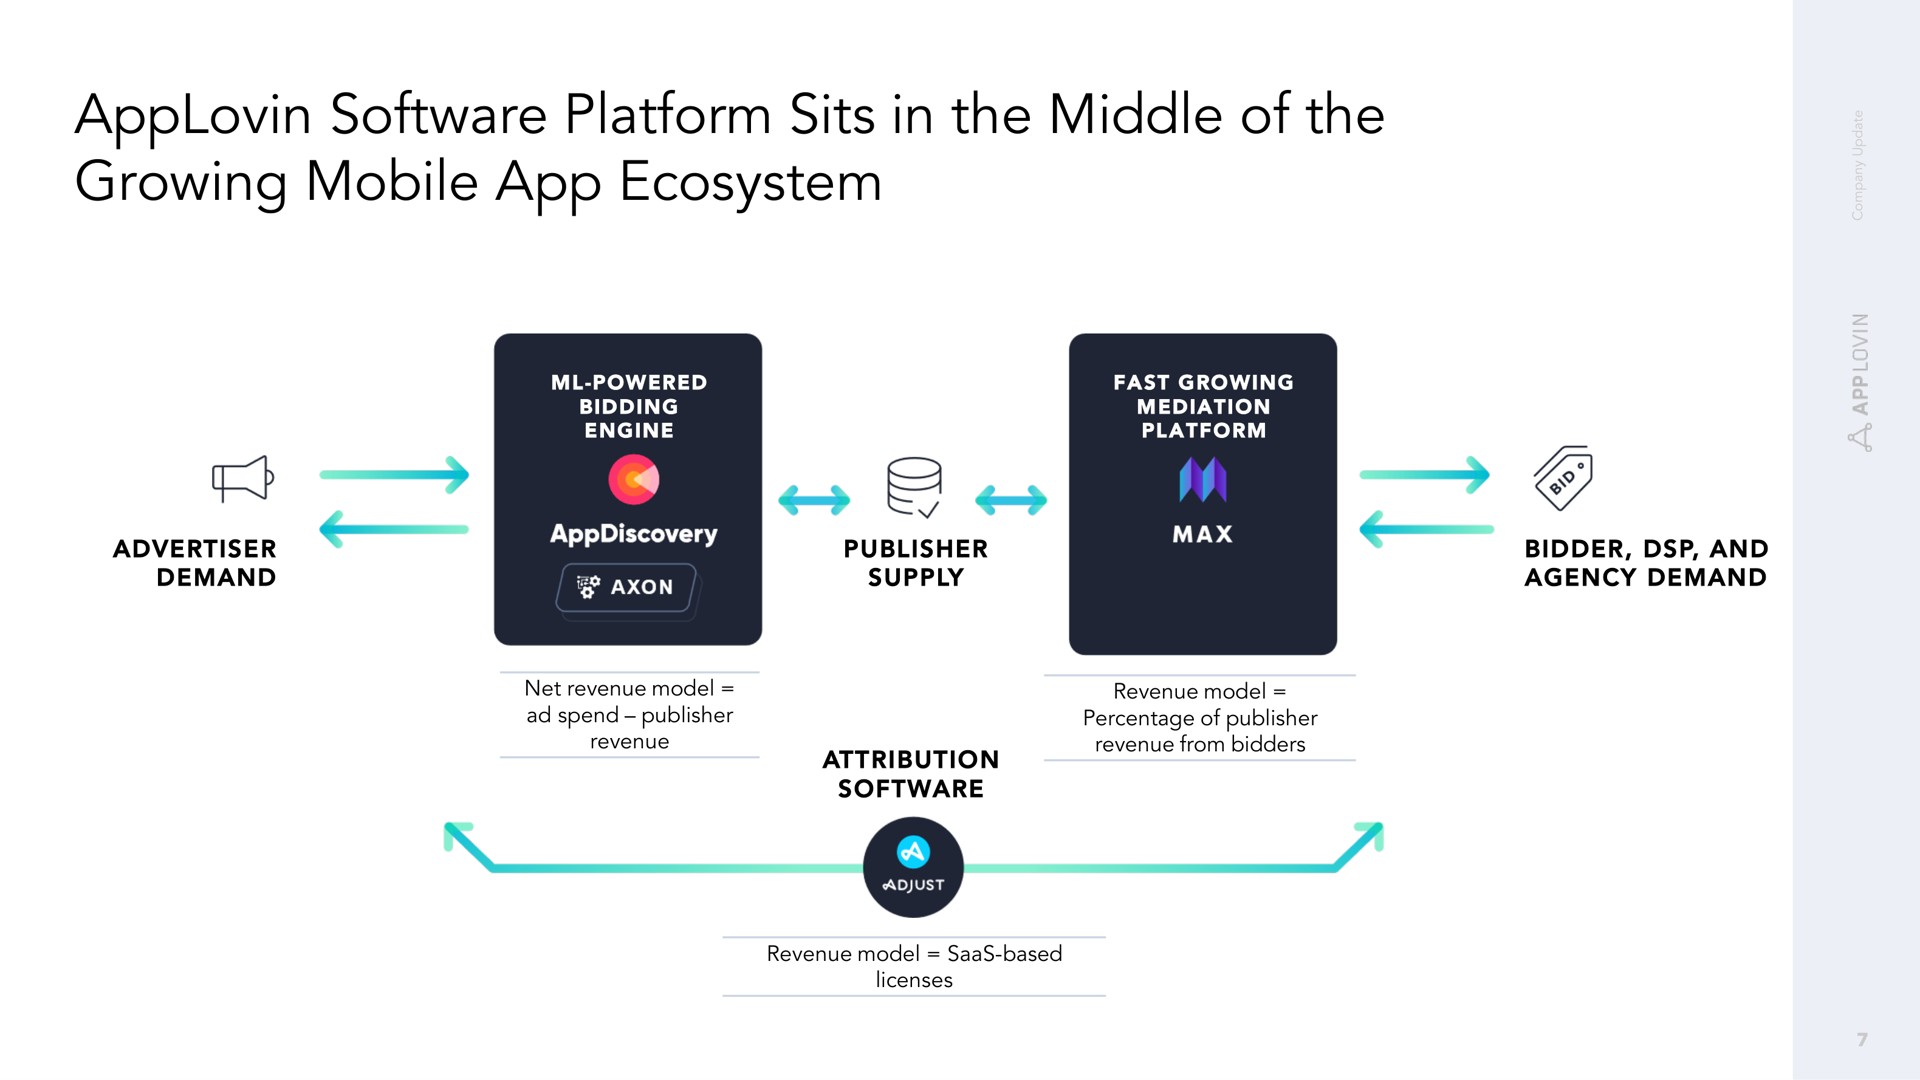 platform sits in the middle of the growing mobile ecosystem | AppLovin